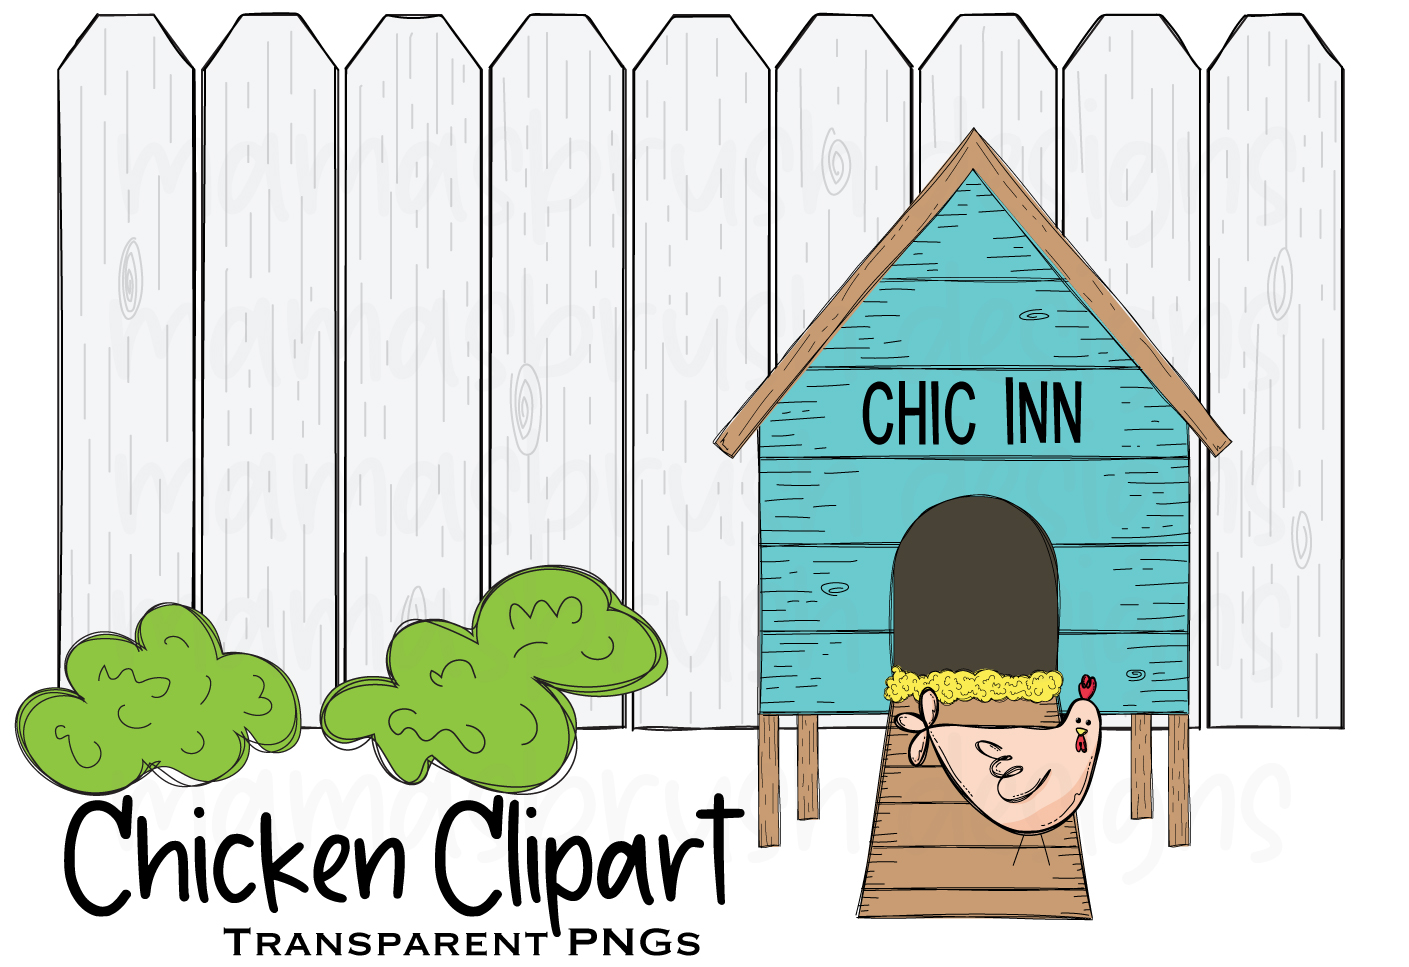 Chicken Clipart Set in color or black and white | mamasbrush

chickens, roosters, chicken coop, chicken signs, transparent background, old truck, flowers, chicken eggs